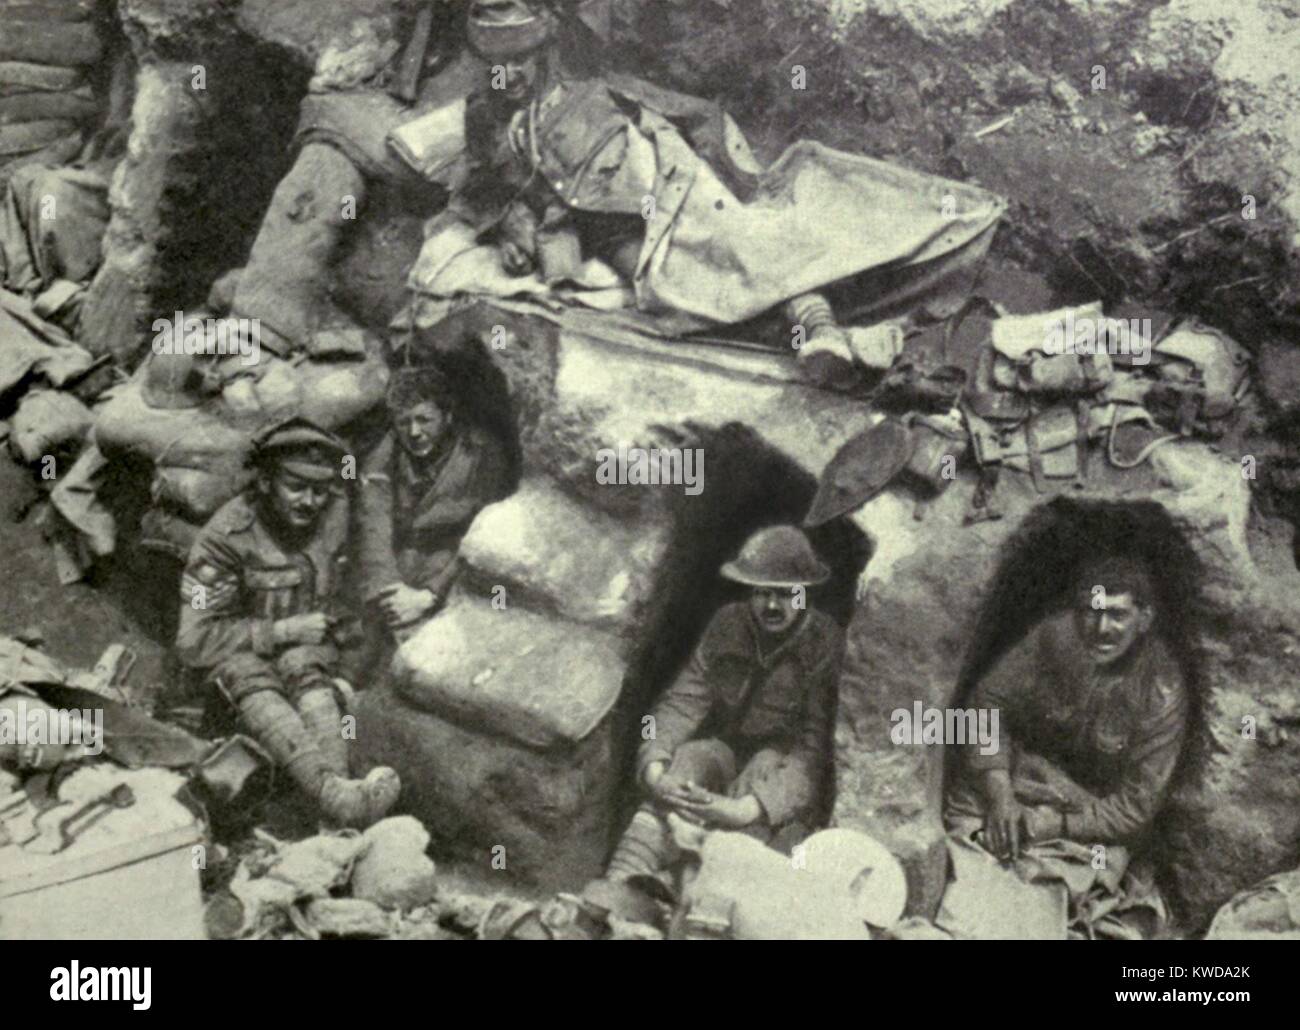 World War 1. Somme Offensive. Soldiers of the Border Regiment resting in shallow dugouts near Thiepval Wood. August 1916. (BSLOC 2013 1 136) Stock Photo